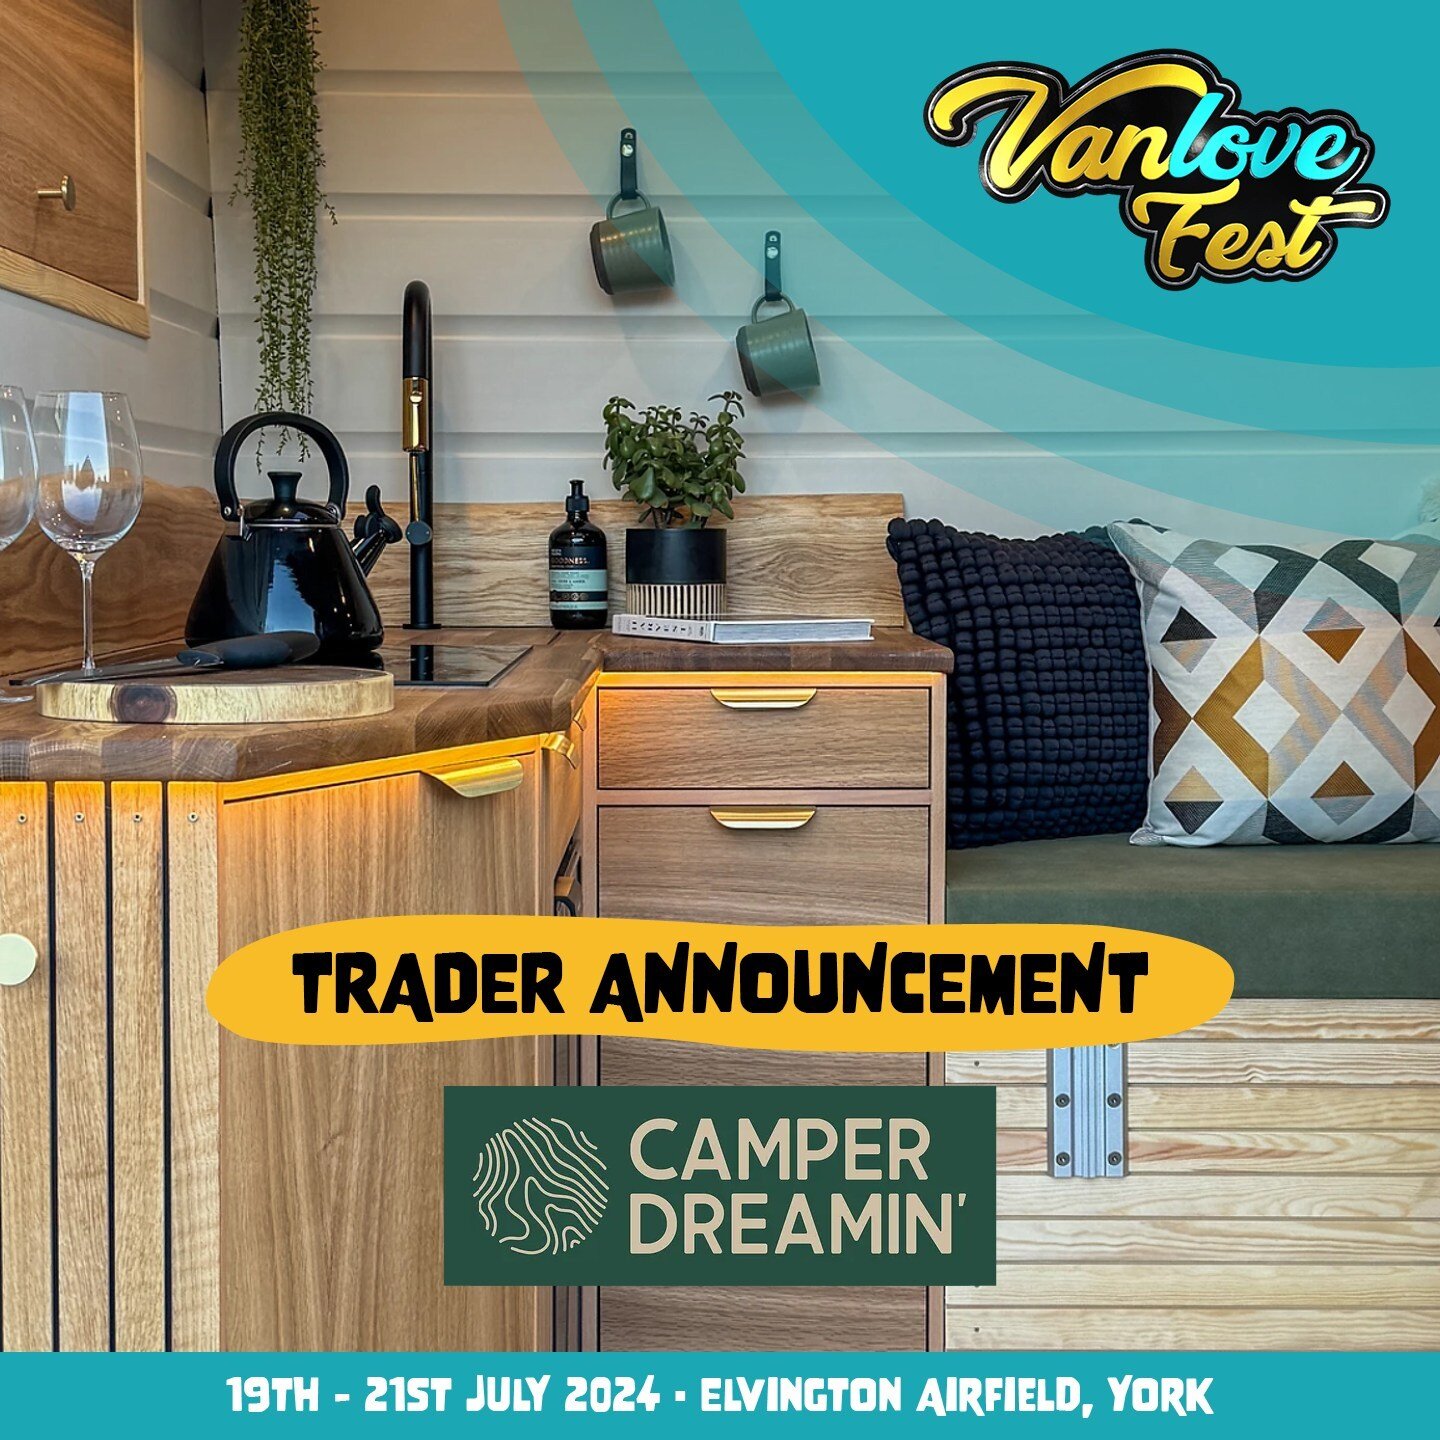 We are thrilled to announce that @camperdreamin will be among the awesome traders at this year's Vanlove Fest! 😍

Izzy &amp; Laurie, the pair behind Camper Dreamin, are not just passionate van lifers but also talented van builders who specialise in 